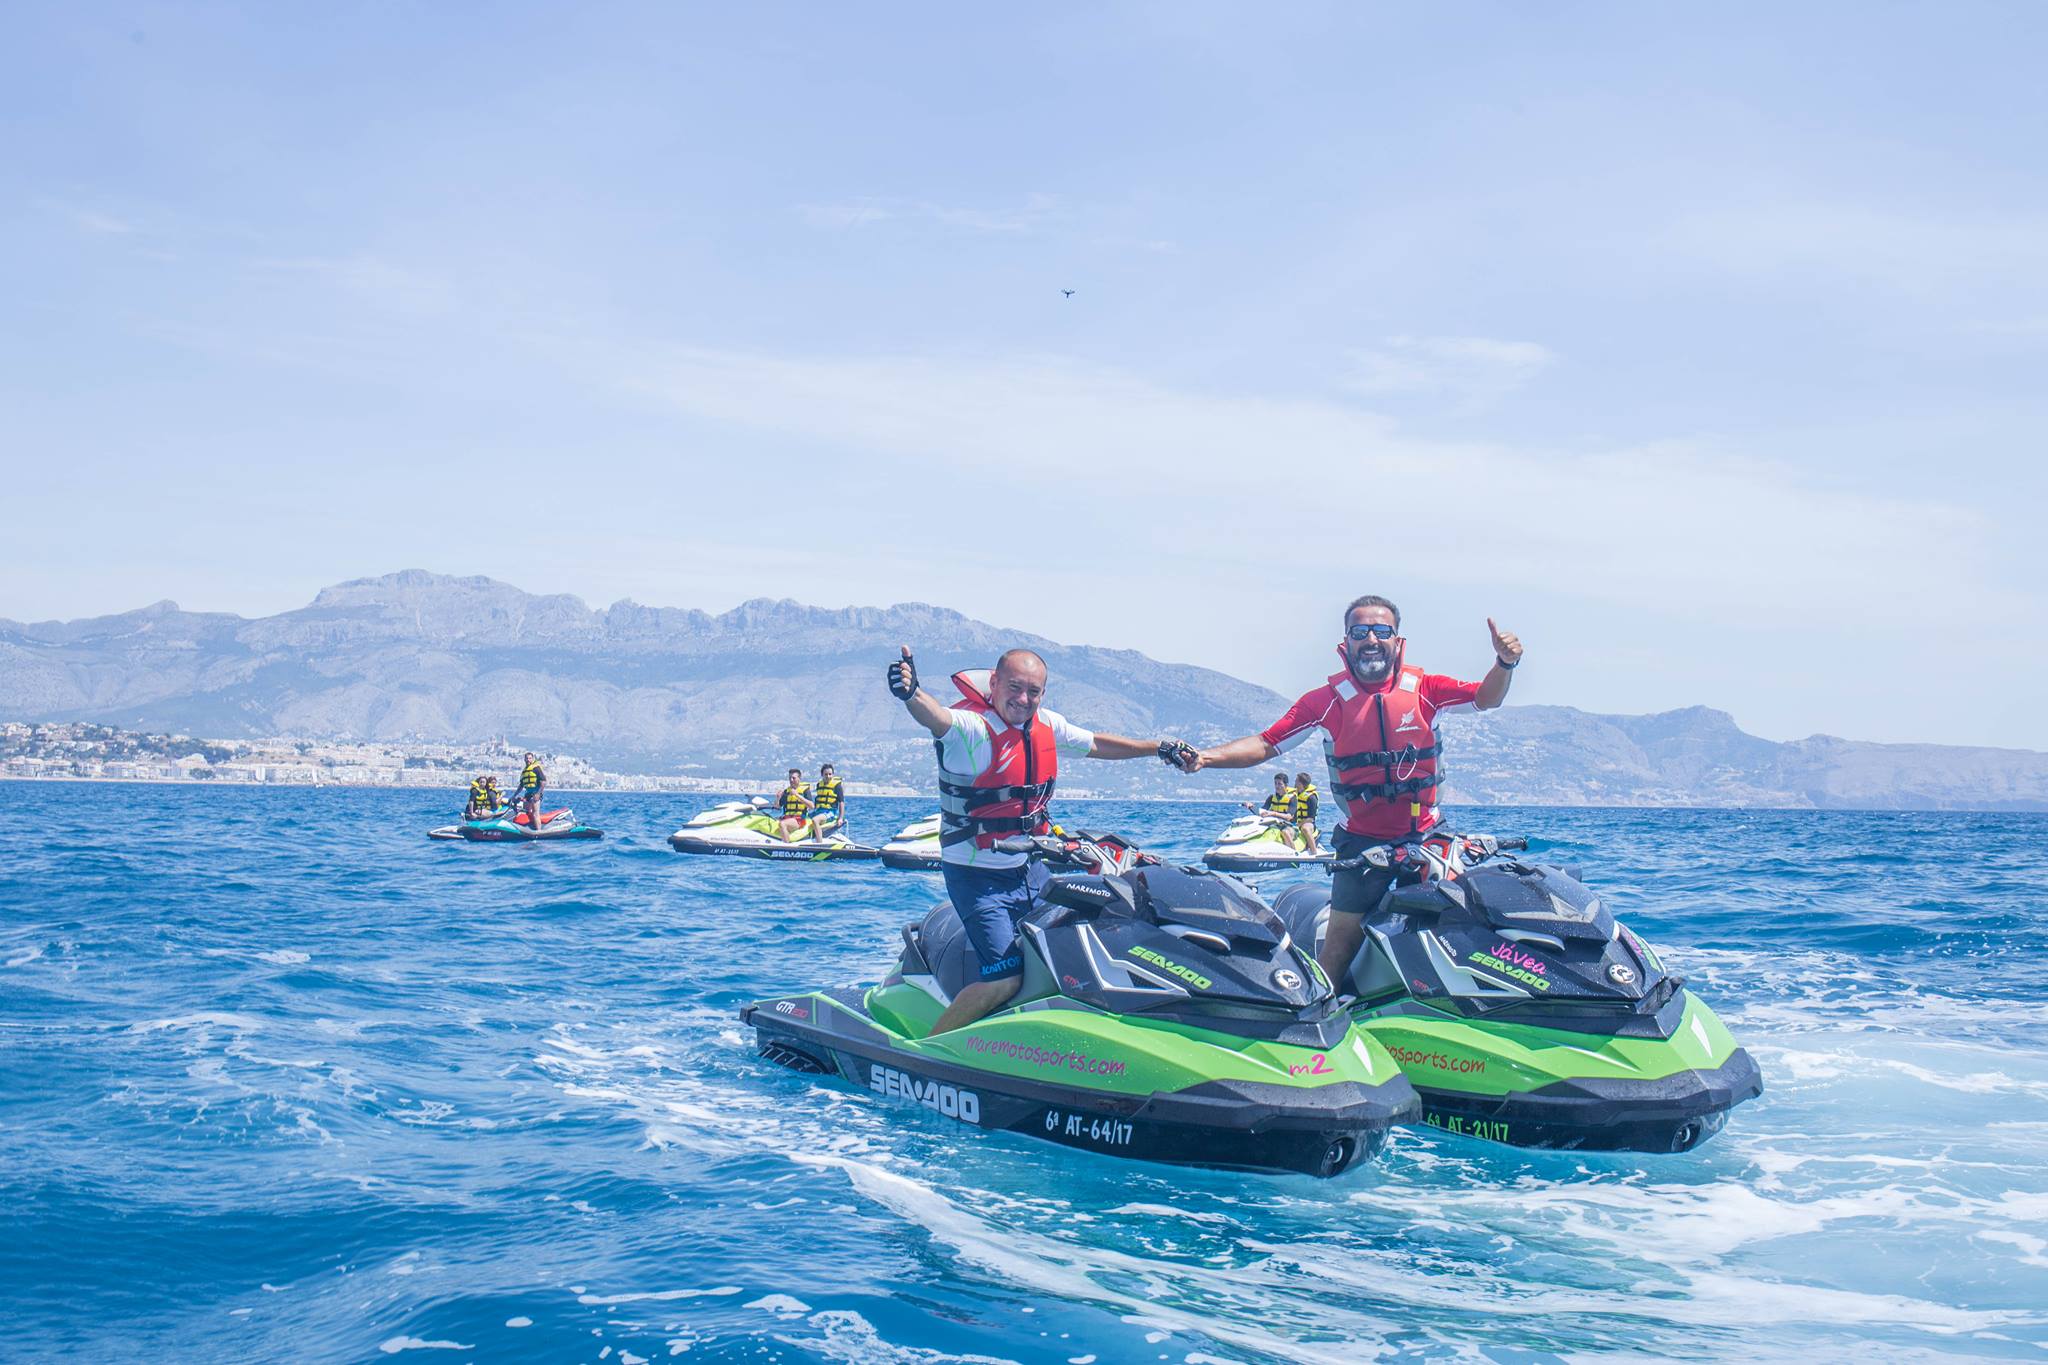 The Ultimate Beginner's Guide: Zooming Safely on Your Jet Ski, by  Davidwarnerd